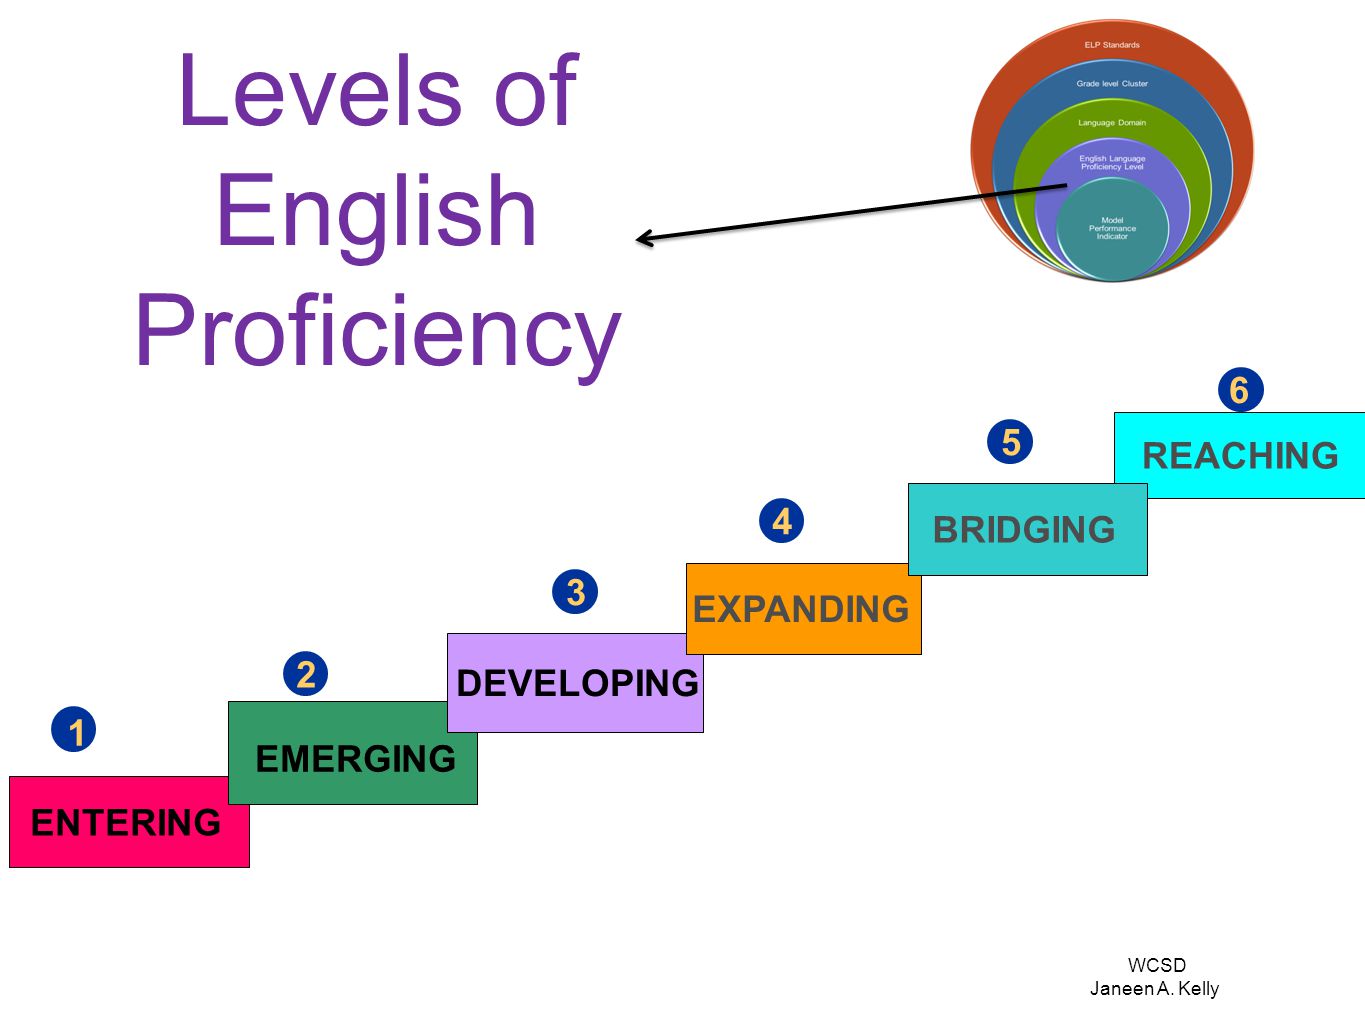 Levels of English Proficiency